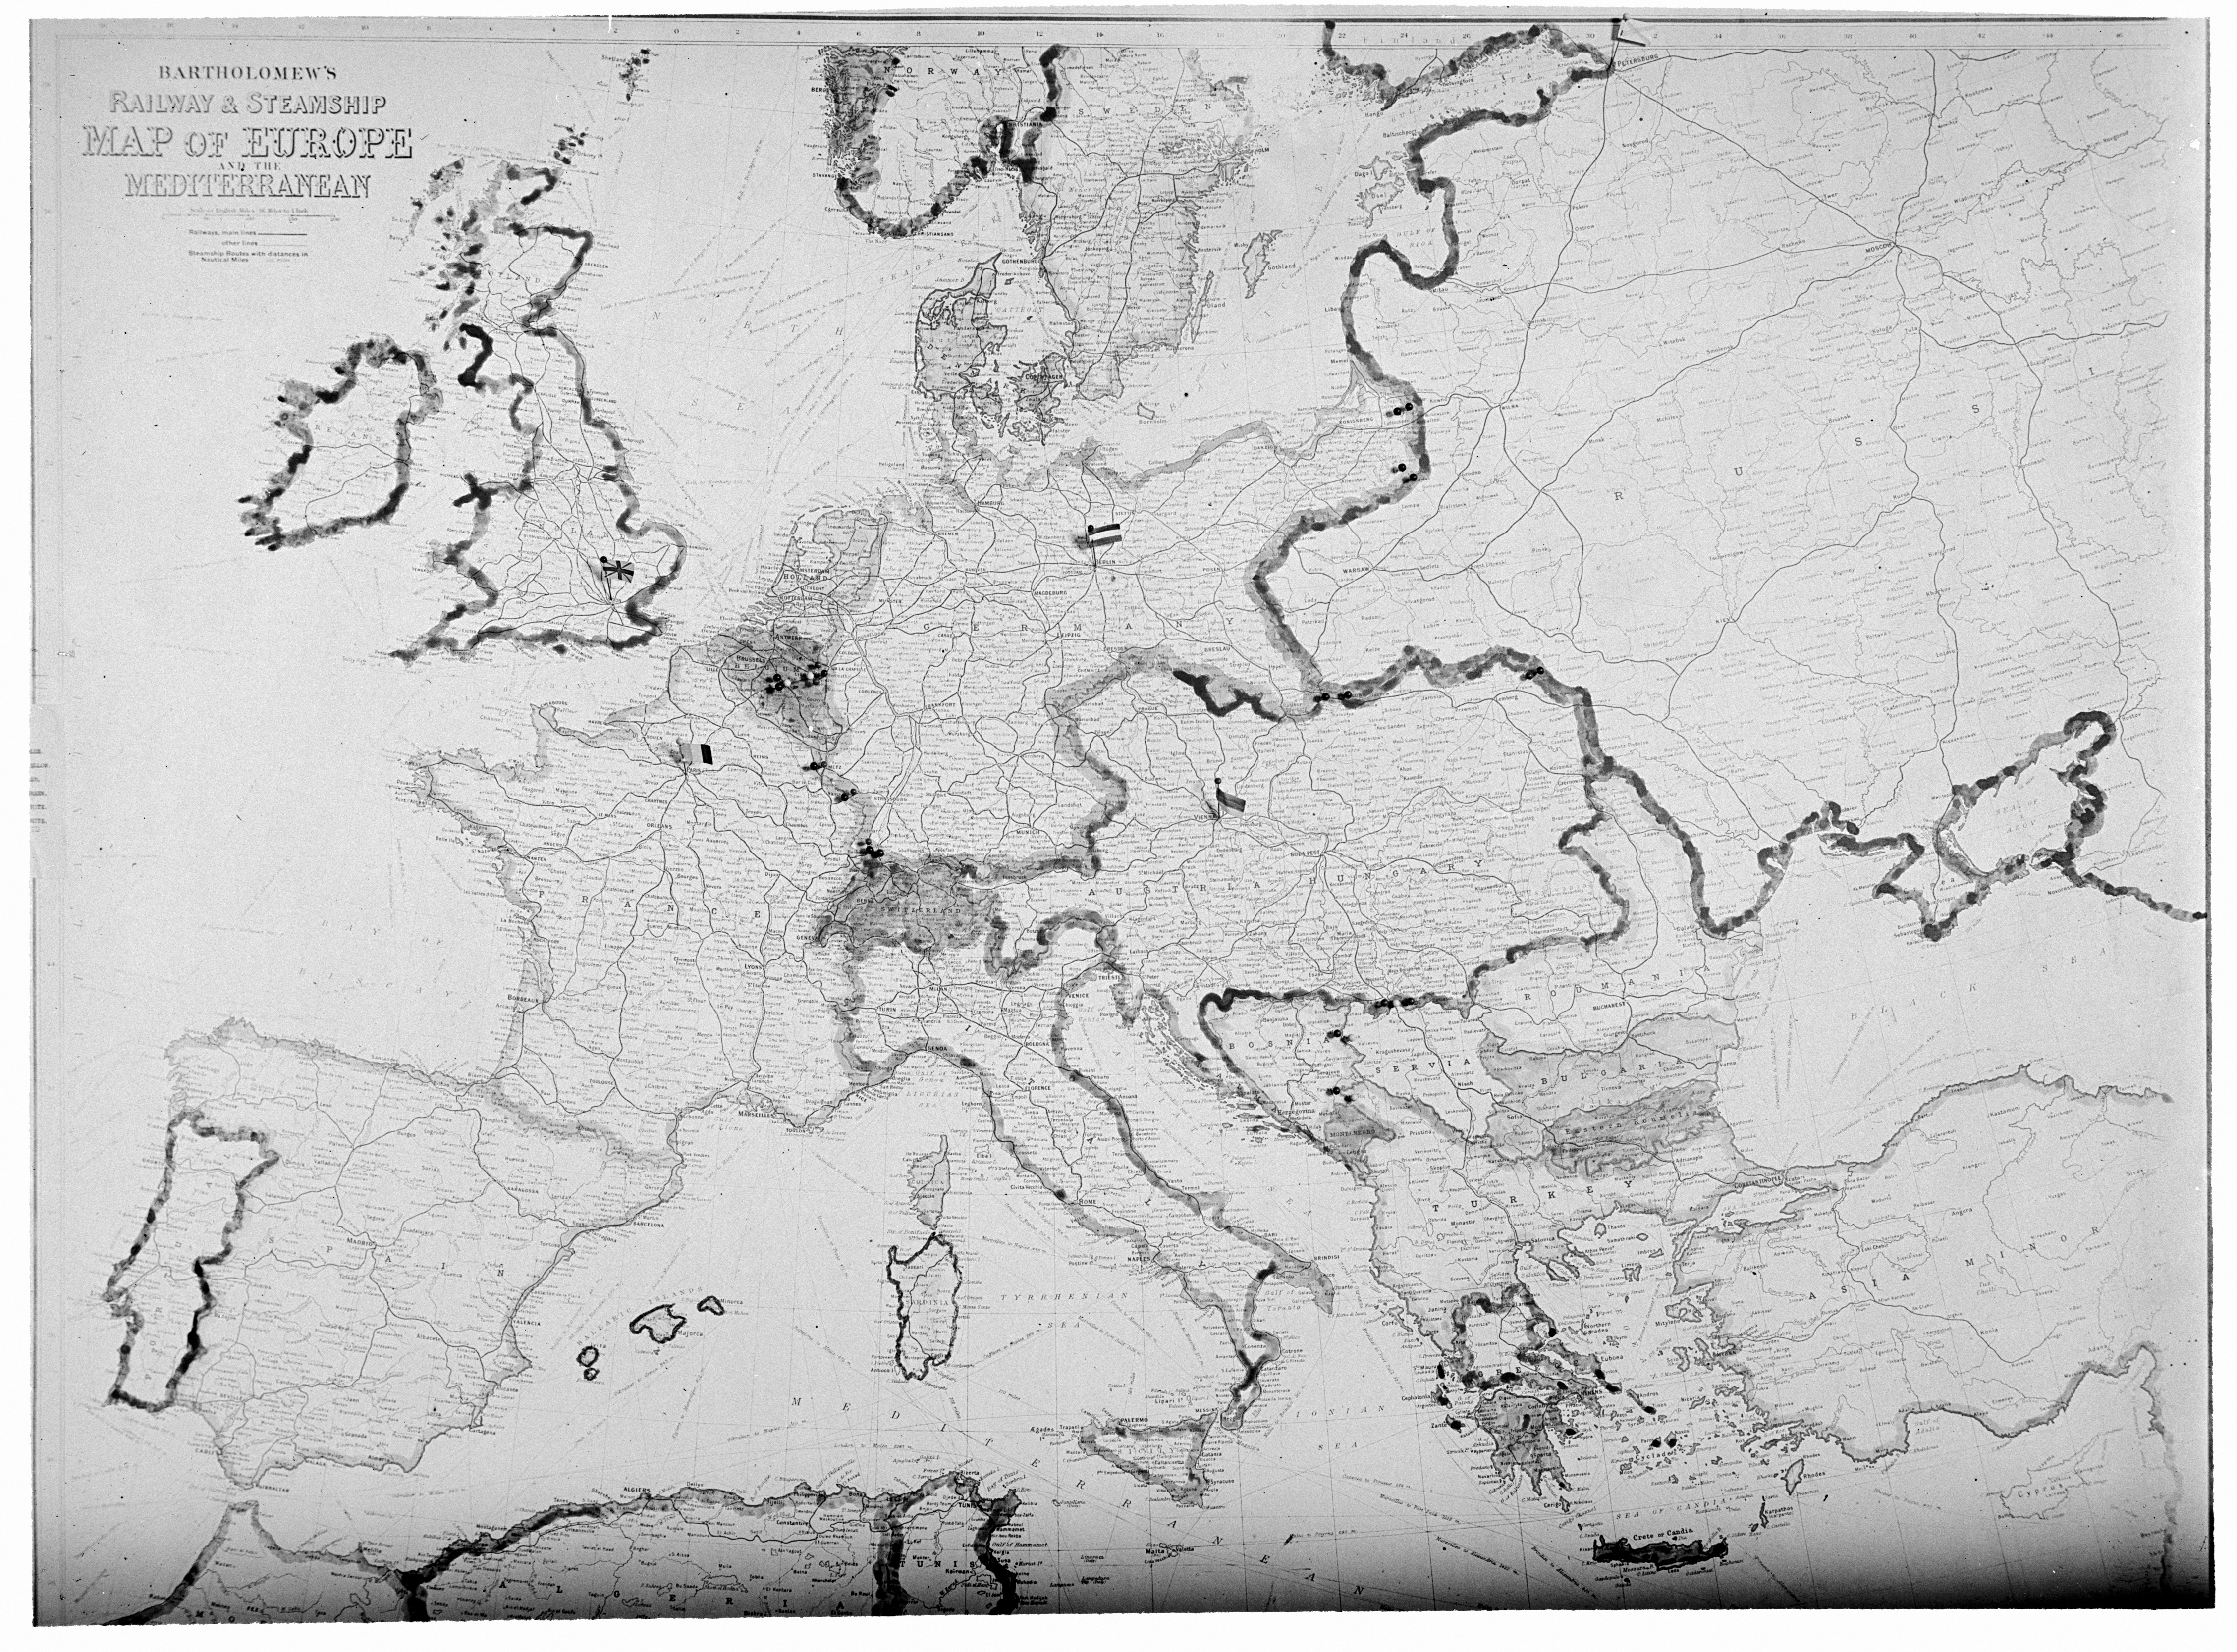 Large Detailed Old Railway And Steamship Map Of Europe 1913